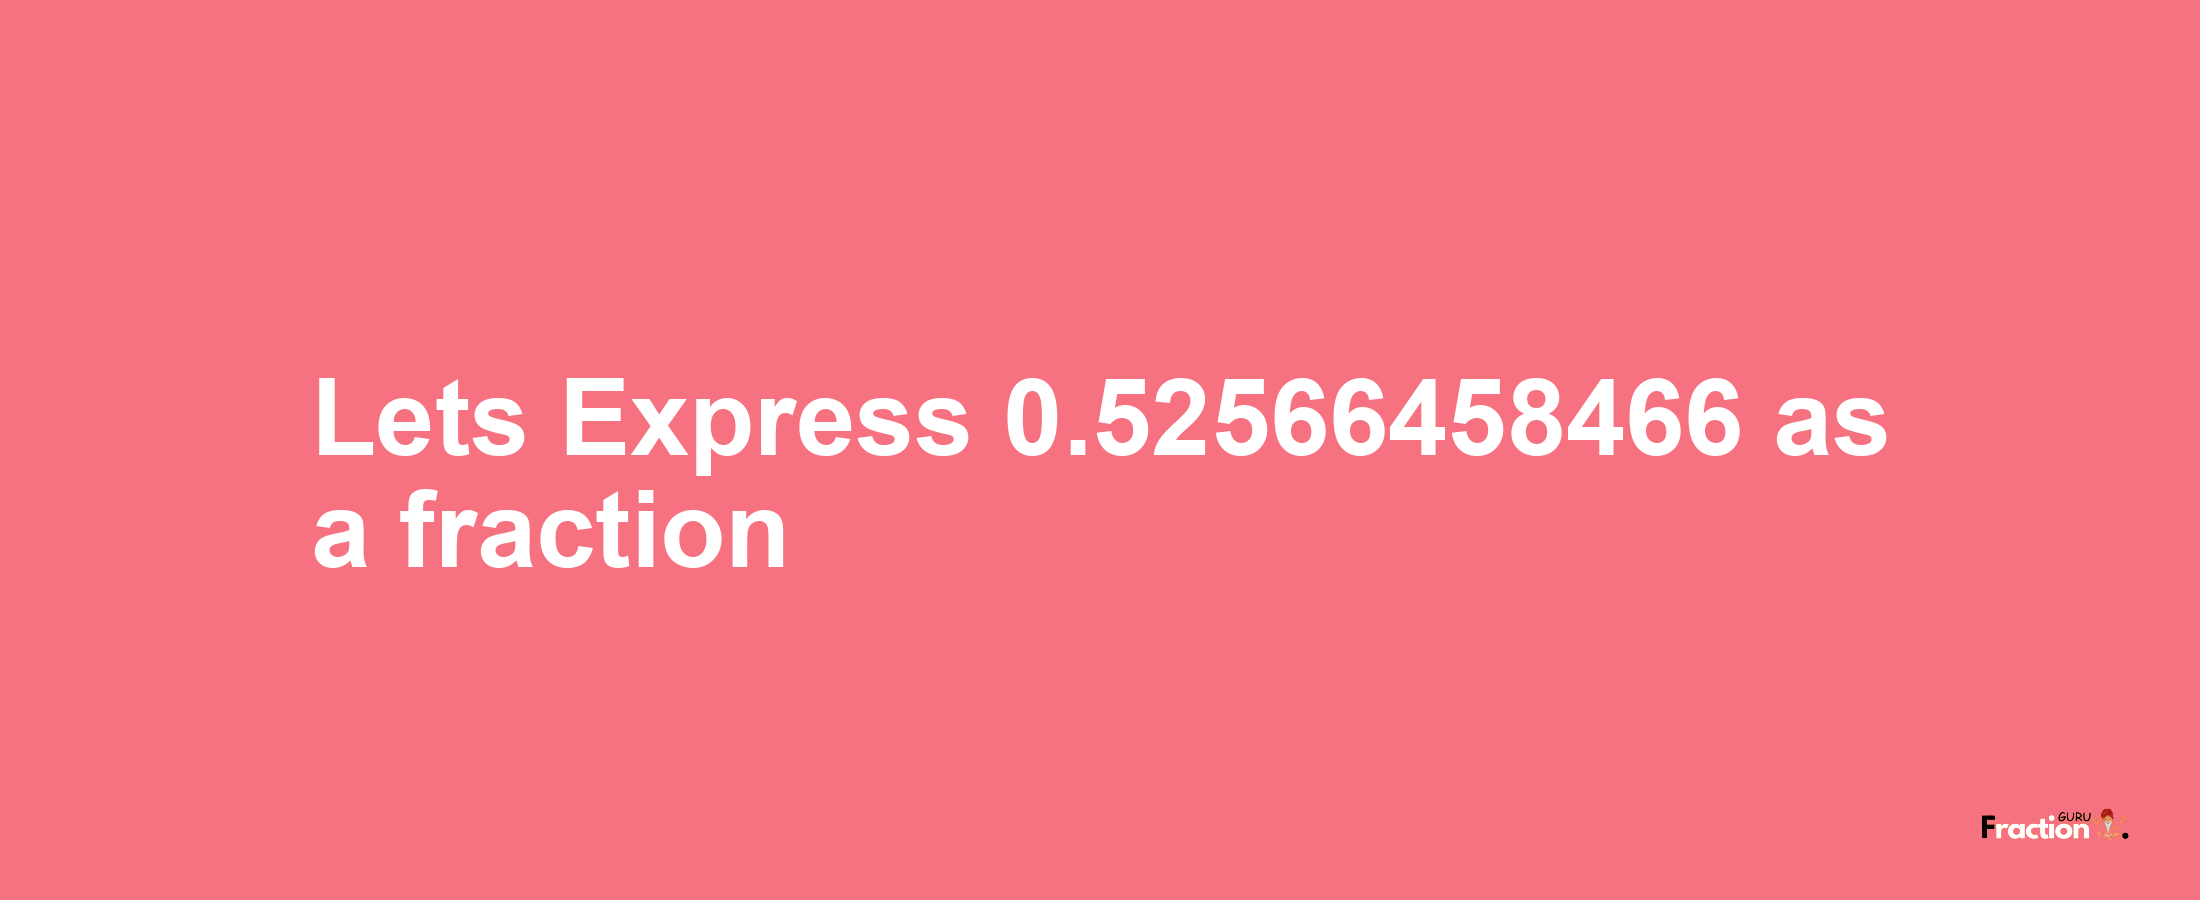 Lets Express 0.52566458466 as afraction